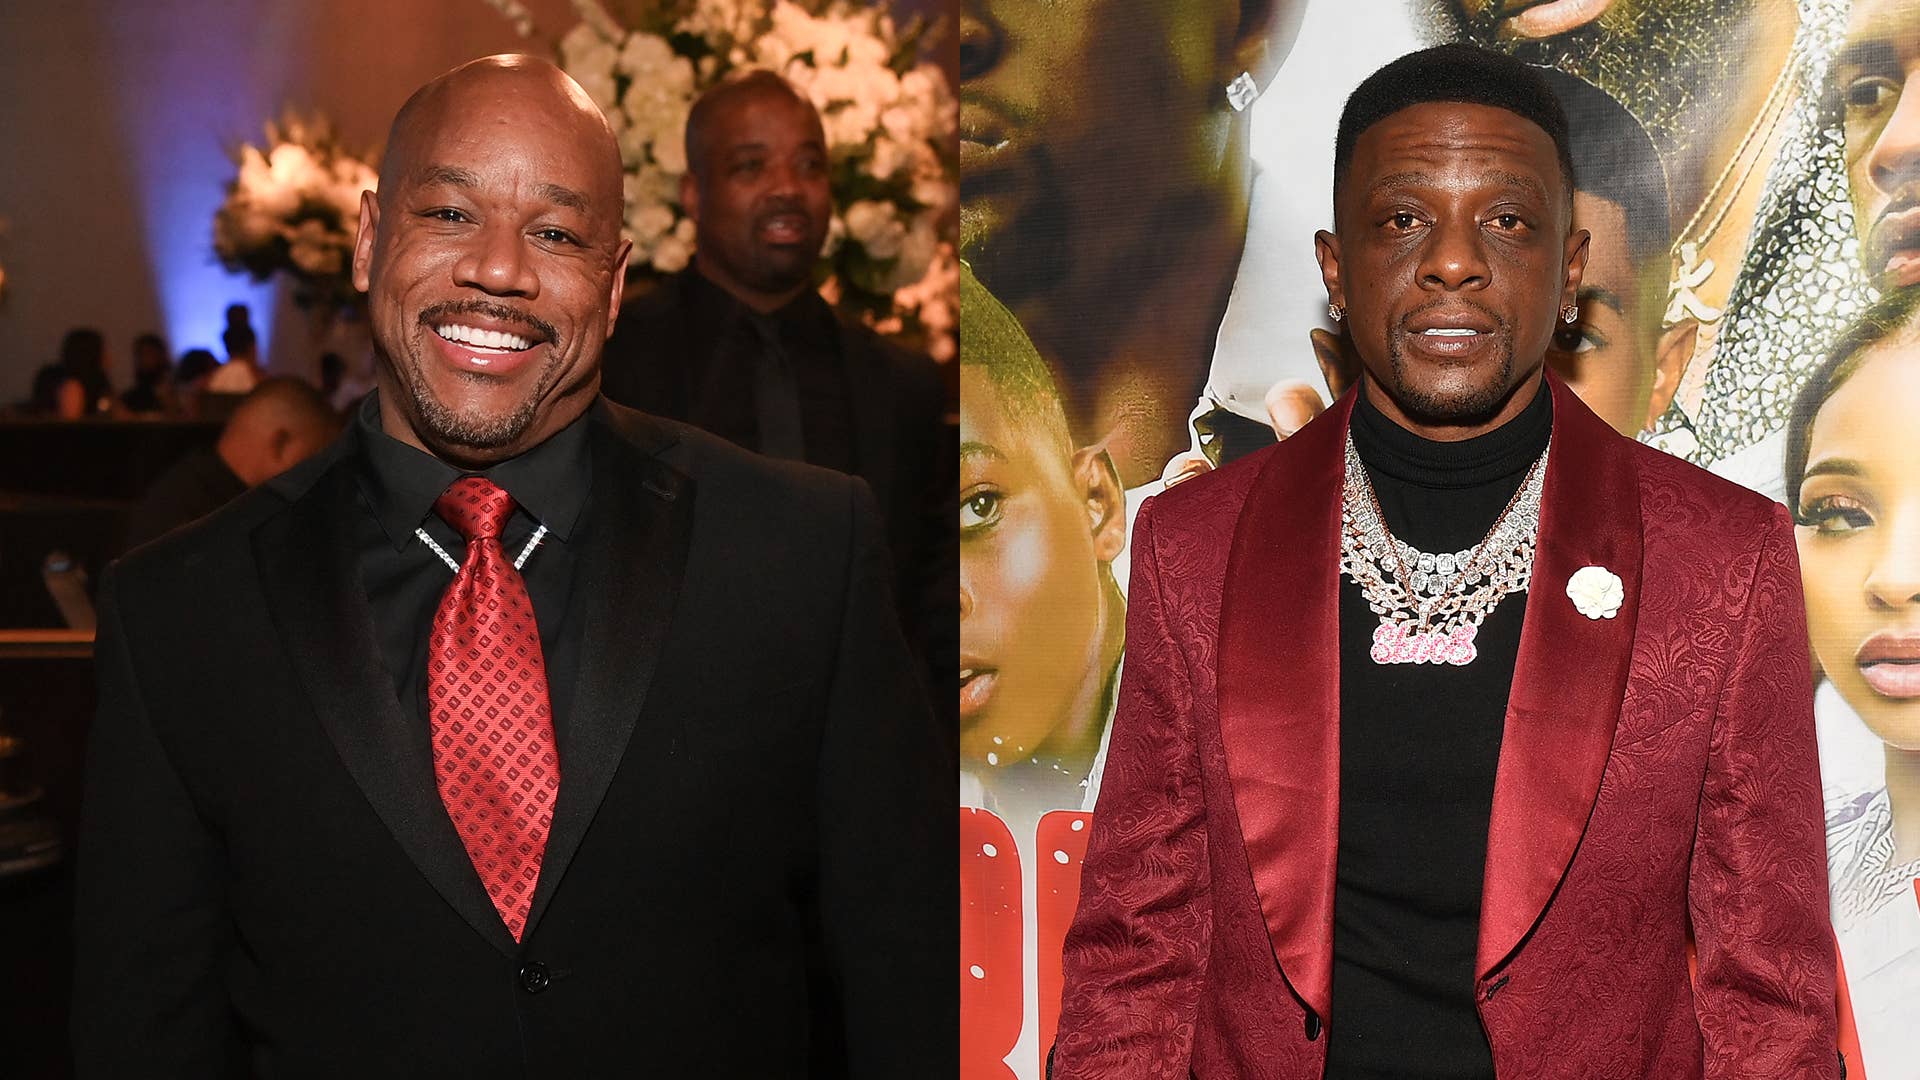 Wack 100 attends the 2nd annual Hollywood Unlocked Impact Awards, Boosie attends the Atlanta red carpet premiere of "Where's MJ?"